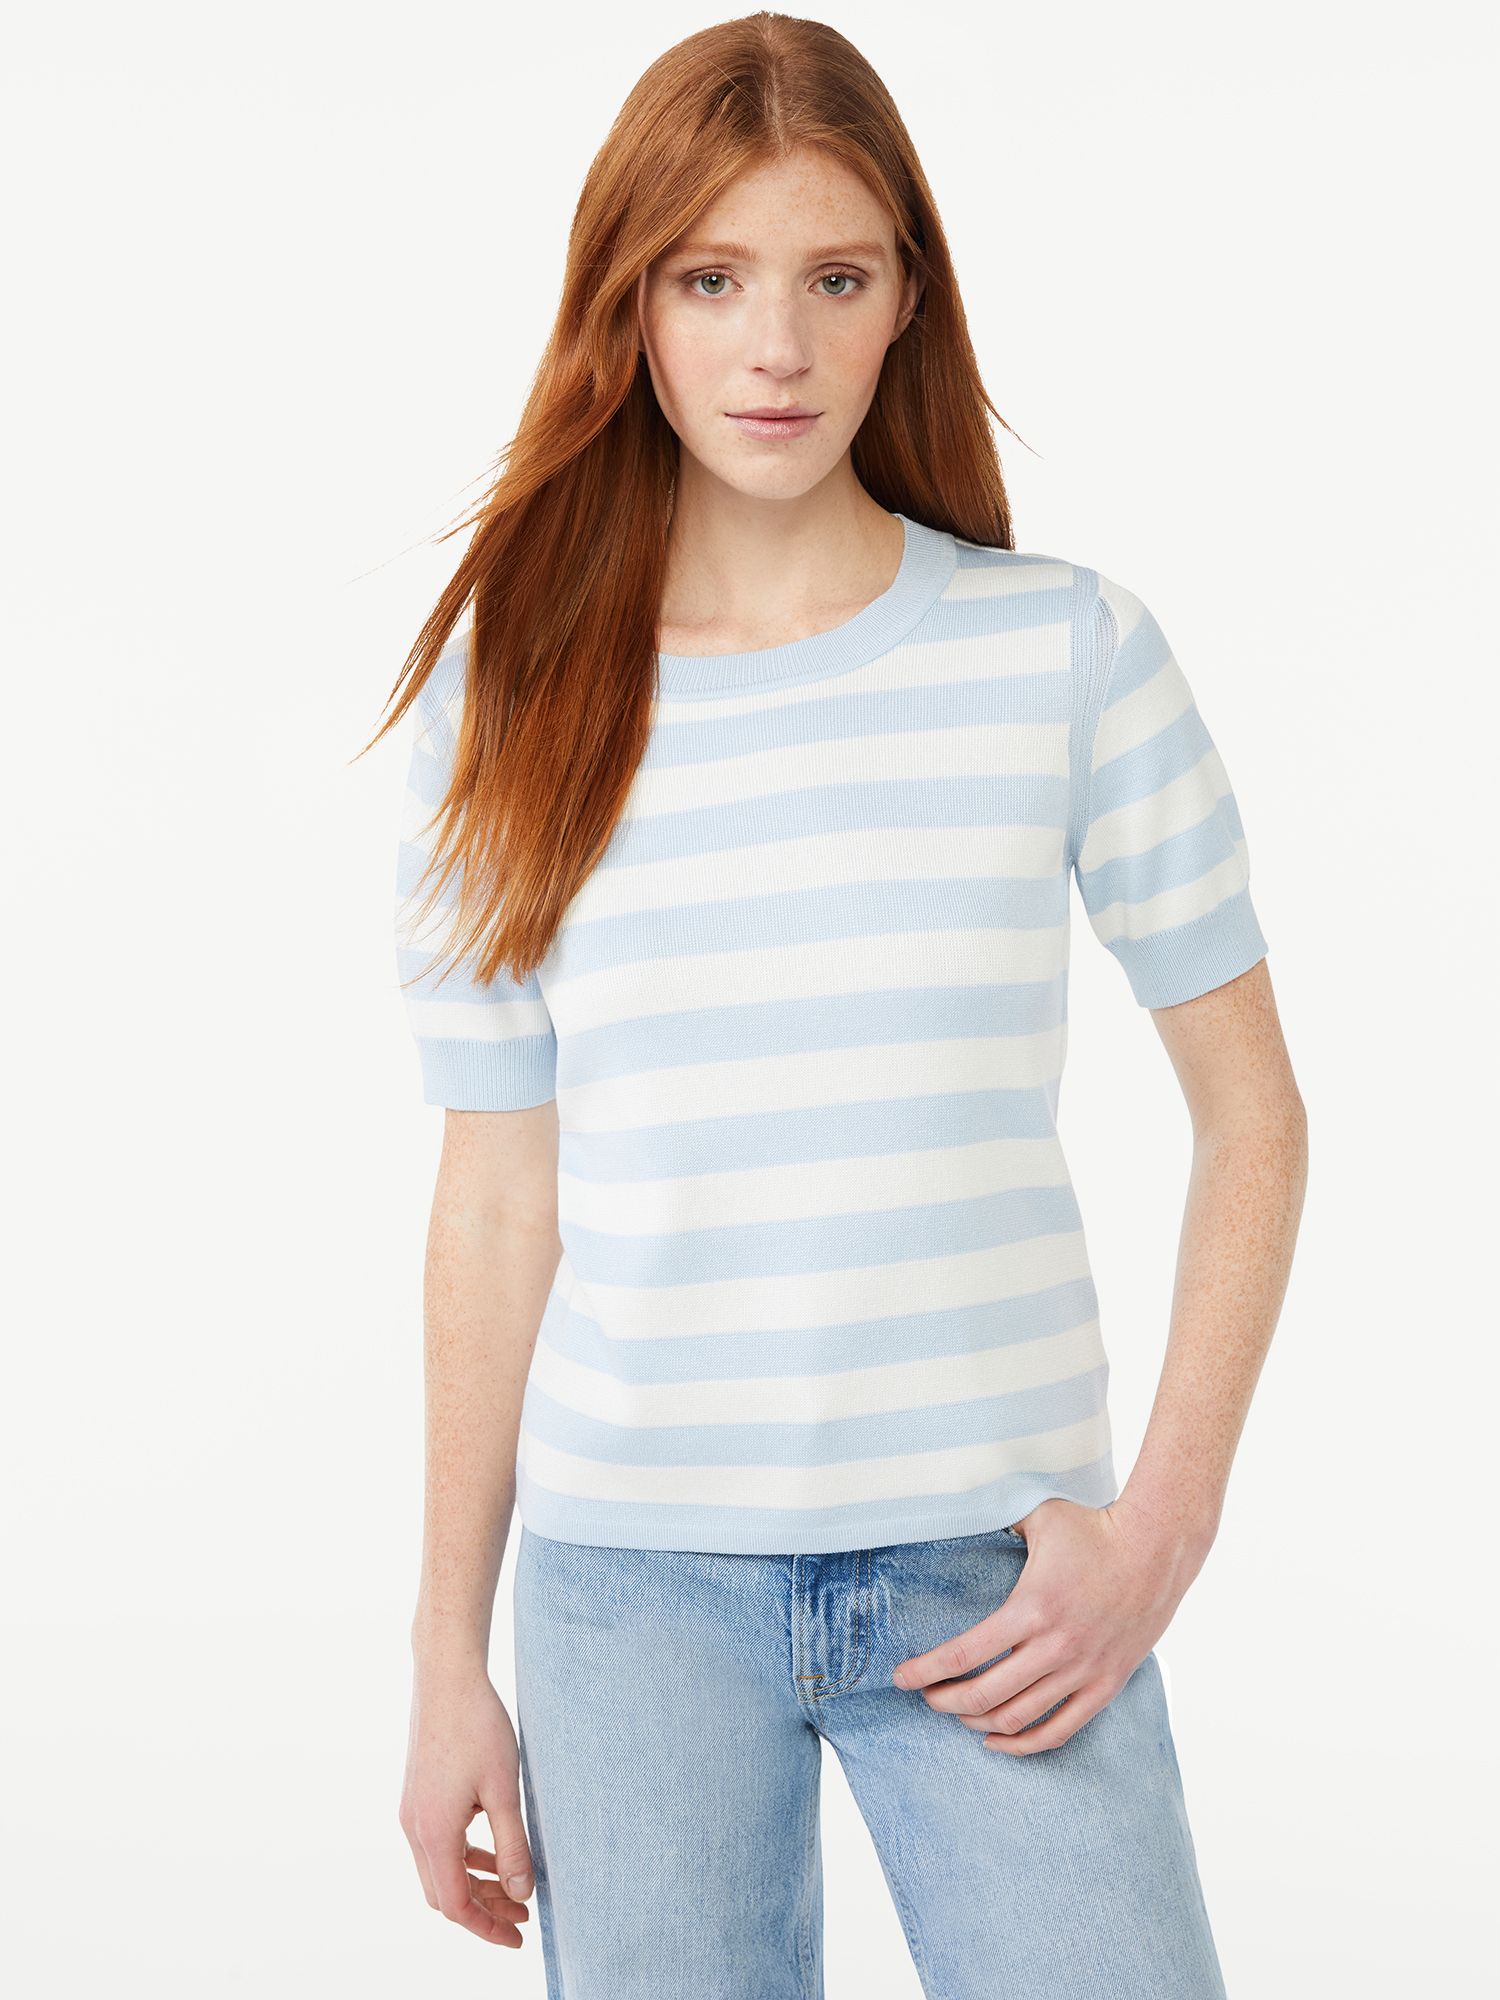 Free Assembly Women's Sweater Tee with Cuffed Short Sleeves, Lightweight | Walmart (US)